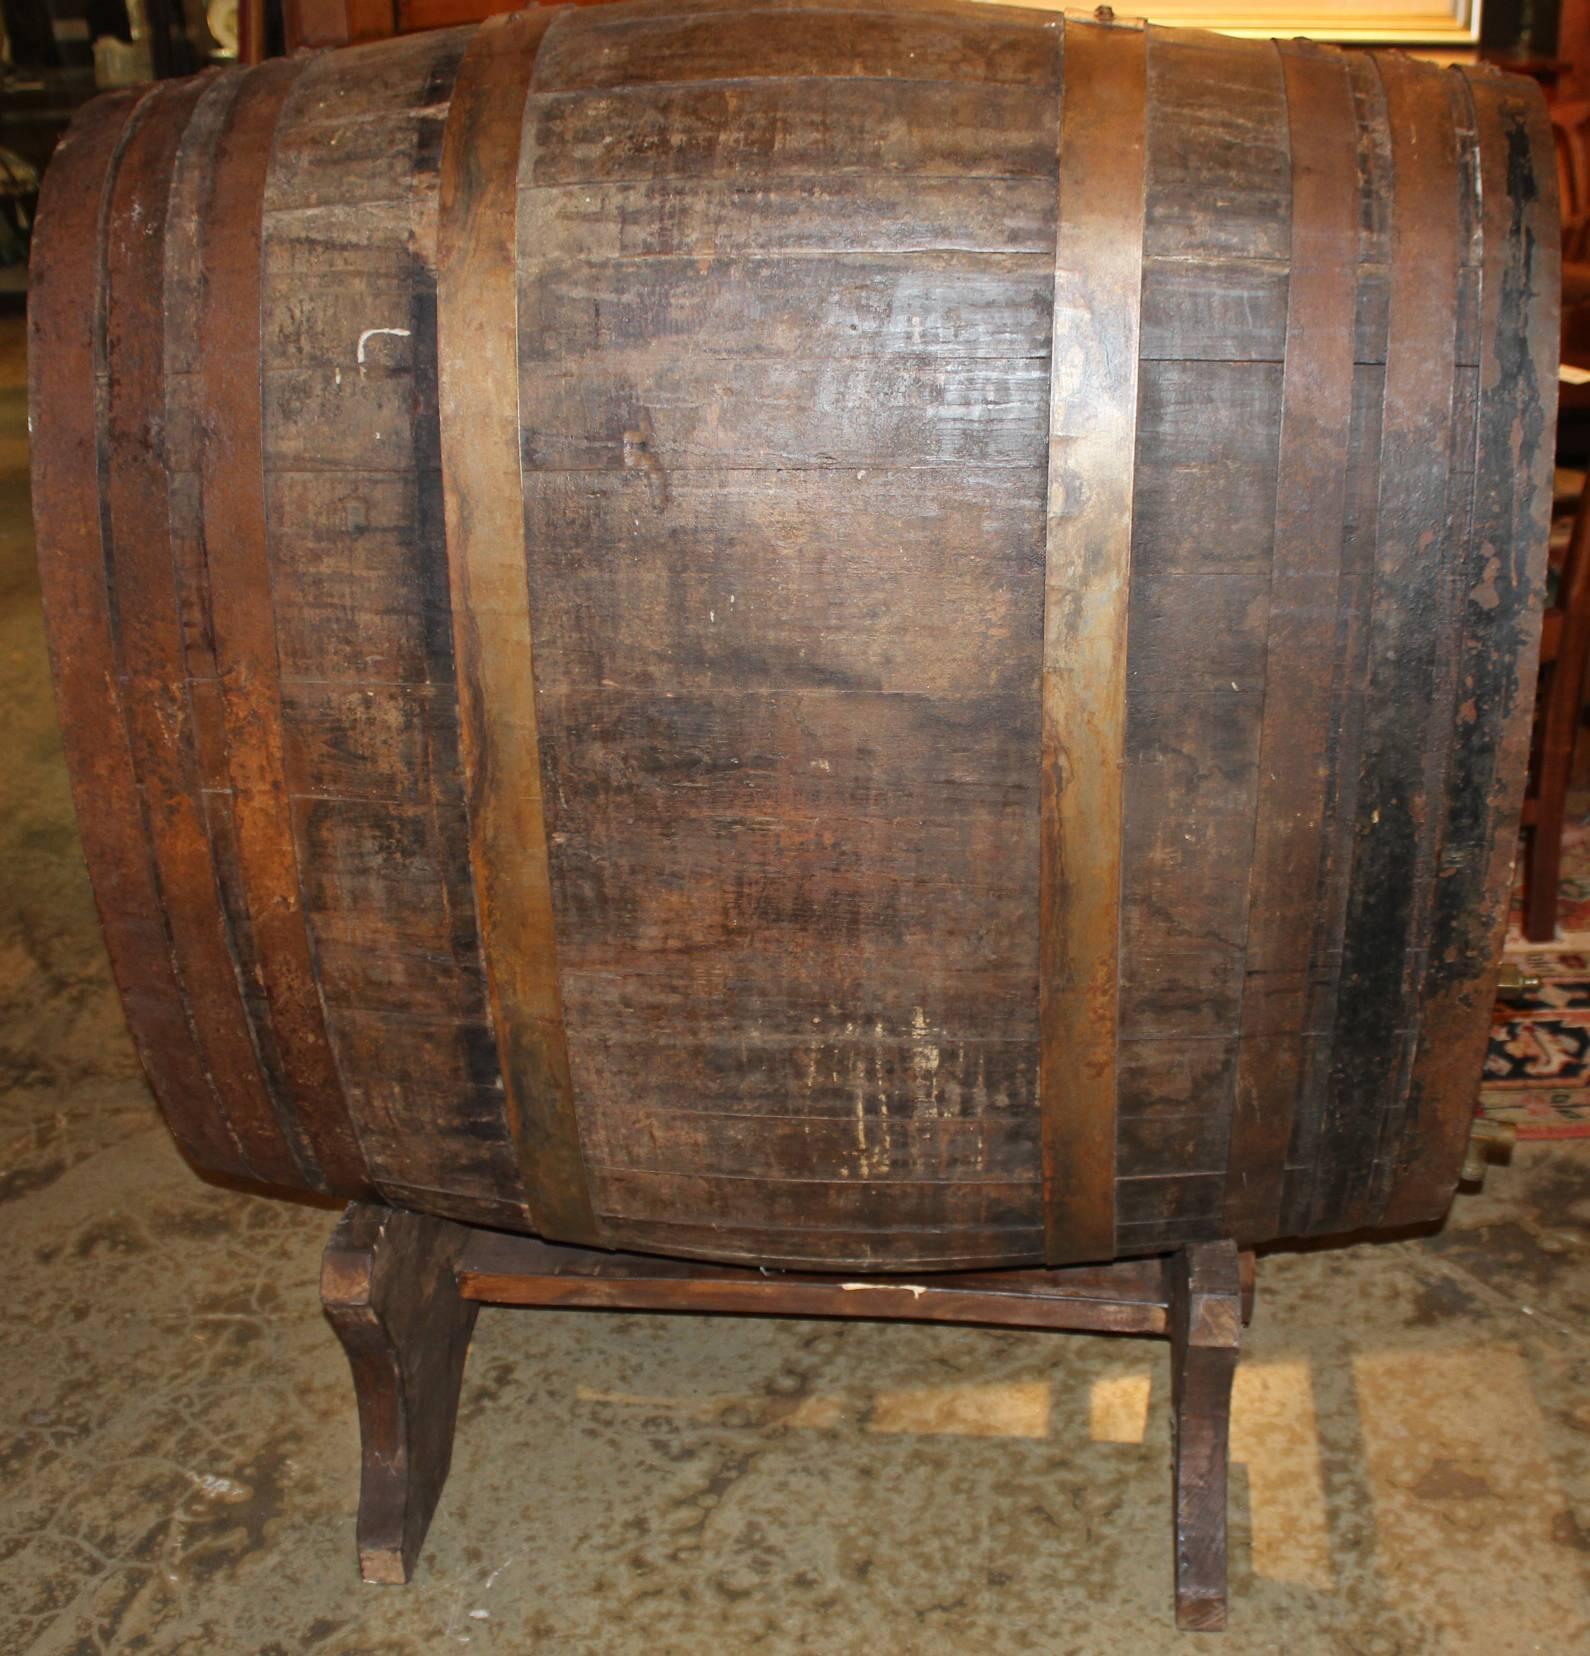 An oversized oval iron bound wine or champagne barrel / cask fitted with brass spigot, one end paint decorated with the numeral “7” above a cream colored cartouche labeled “Veuve Clicquot,” and fitted to a cradle Stand. Dates to the late 19th or